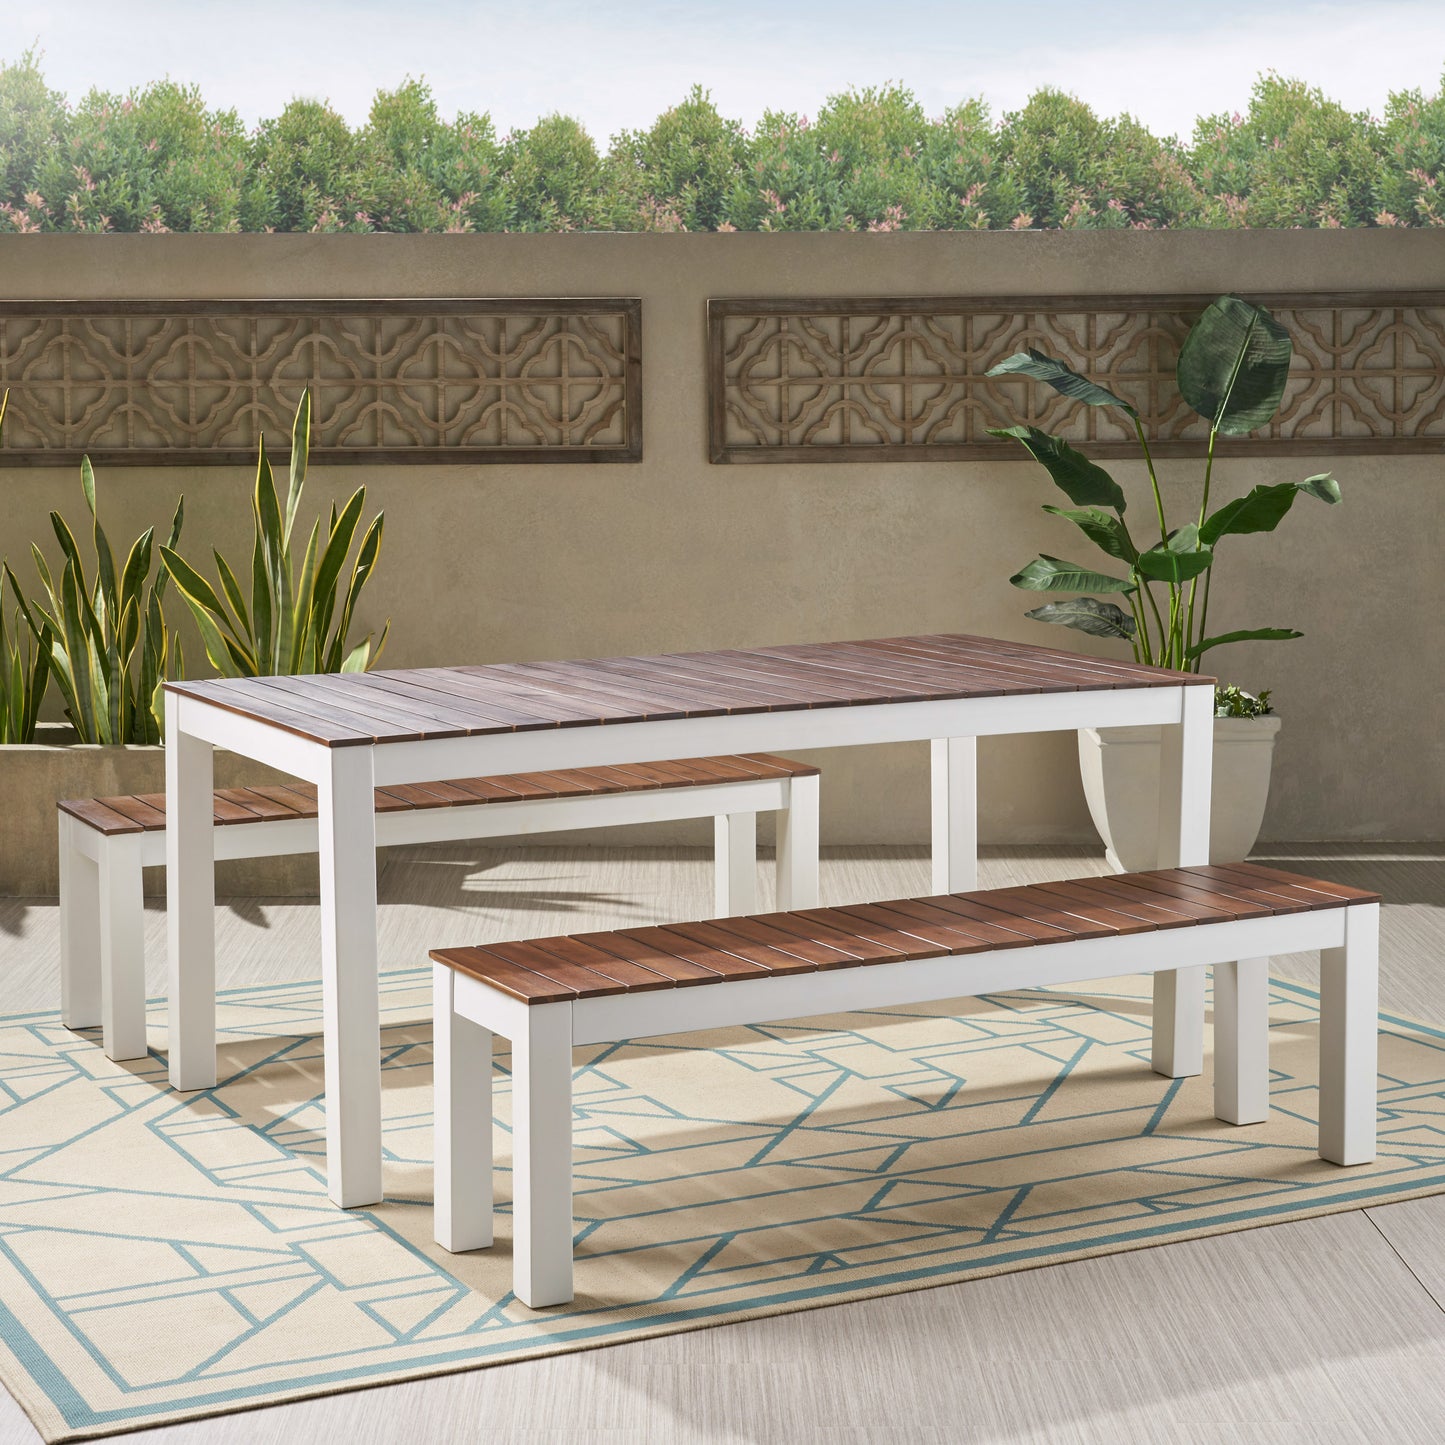 Rodanthe Outdoor Contemporary 3 Piece Acacia Wood Picnic Dining Set with Benches